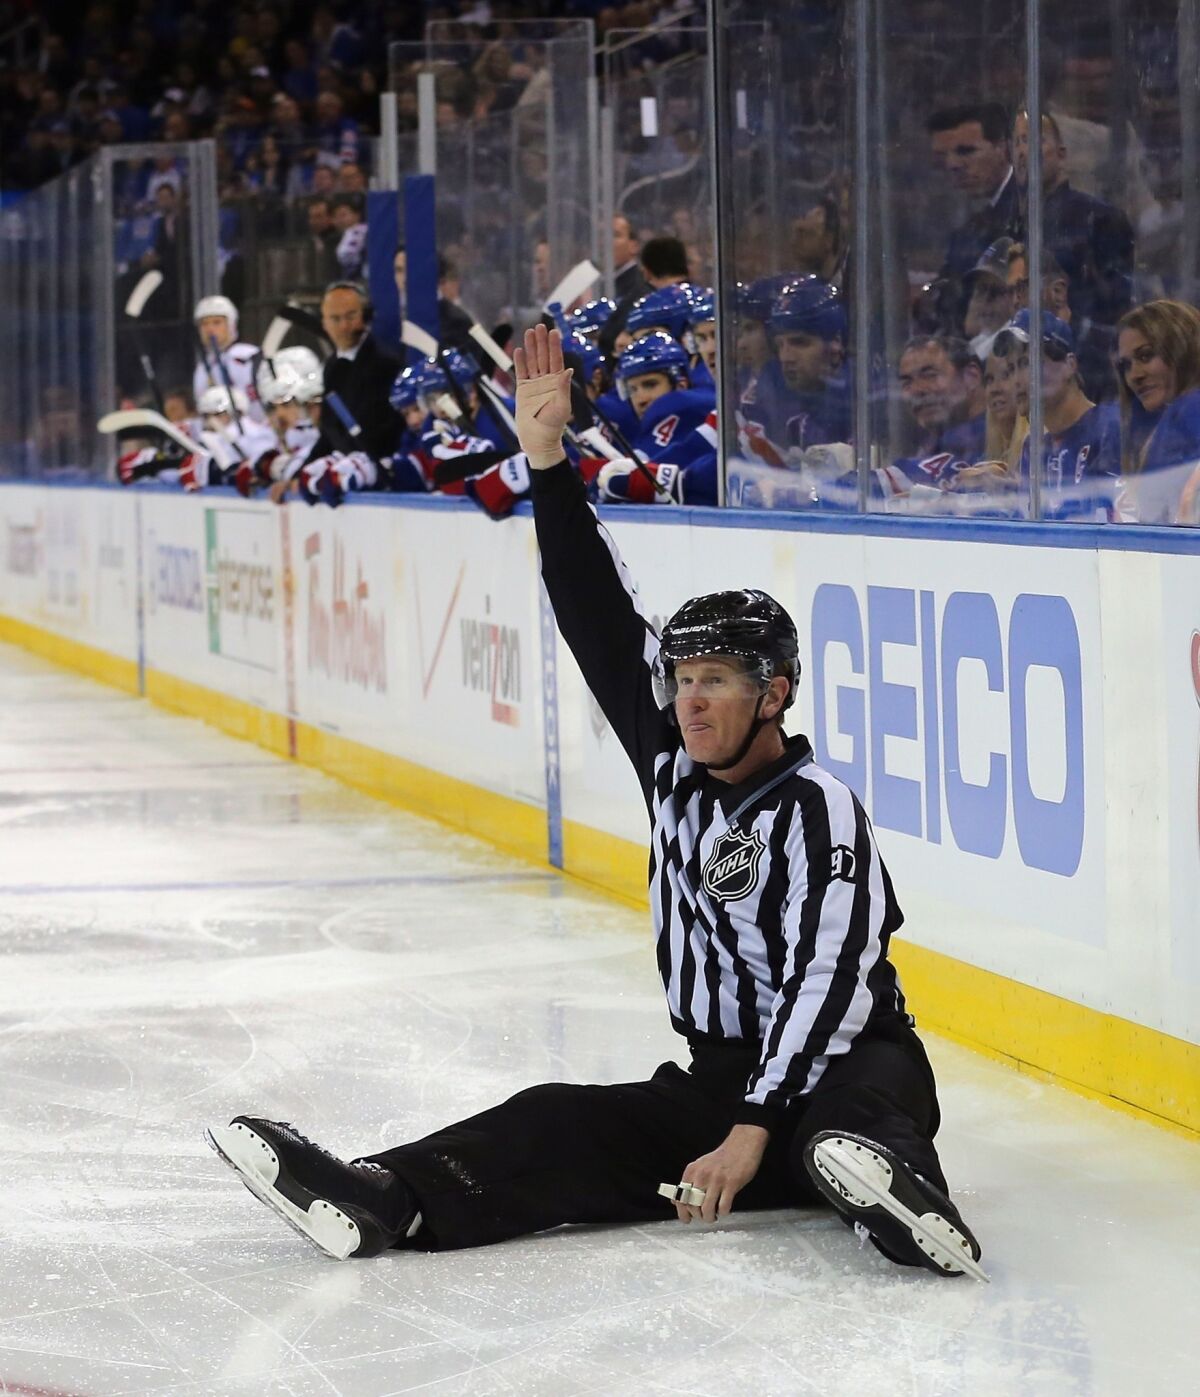 Linesman Jean Morin #97 makes a first period icing call during the game between the New York Rangers and the Washington Capitals in Game Three of the Eastern Conference Quarterfinals during the 2013 NHL Stanley Cup Playoffs at Madison Square Garden on May 6, 2013.